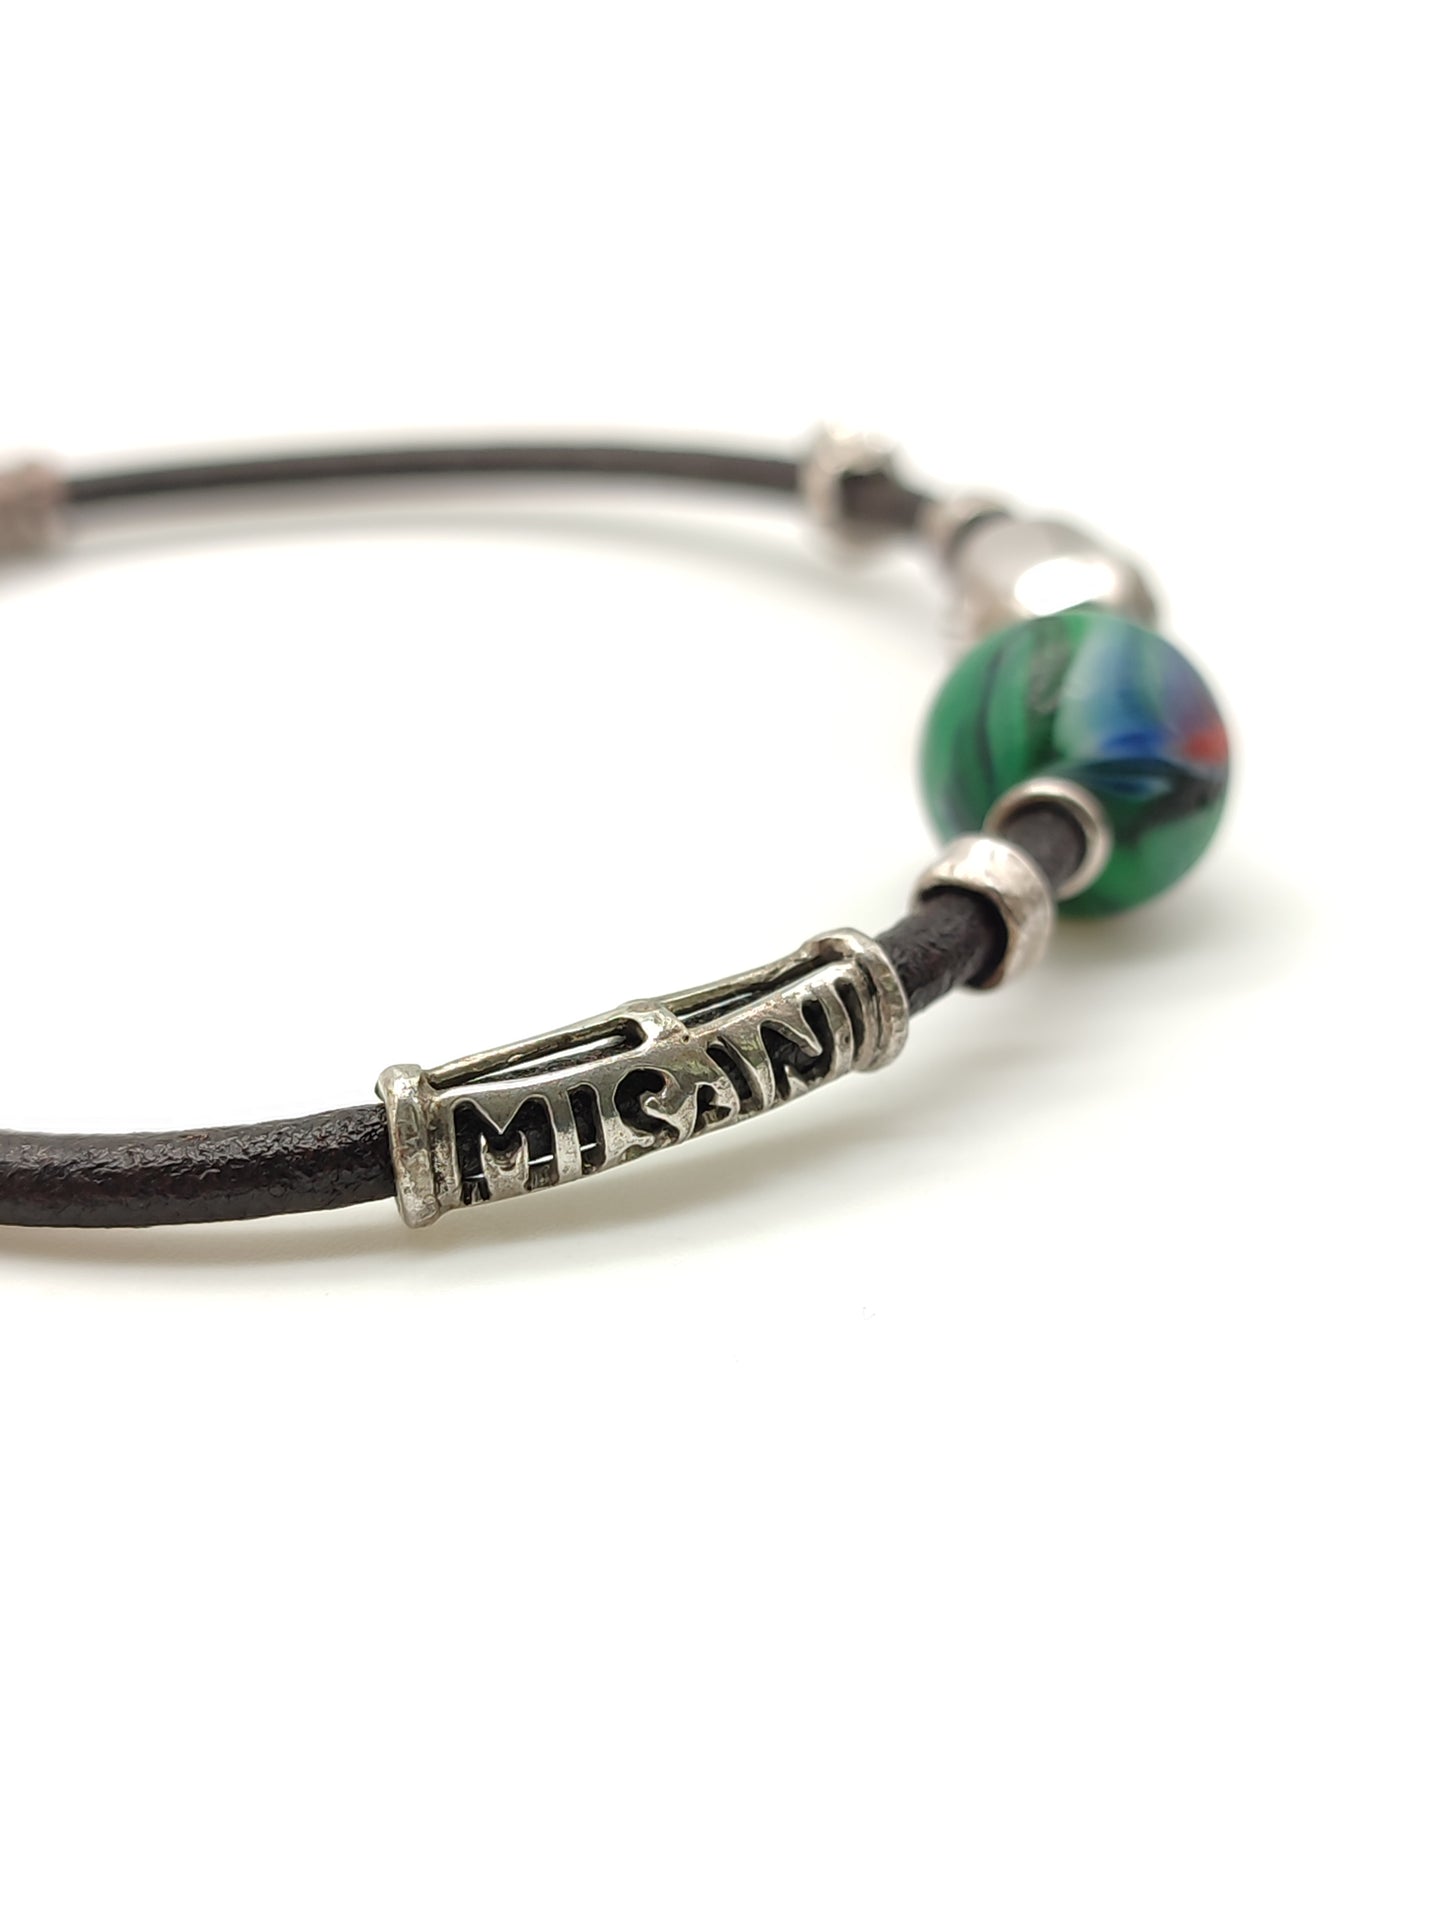 Bracelet in silver, leather and painted wood